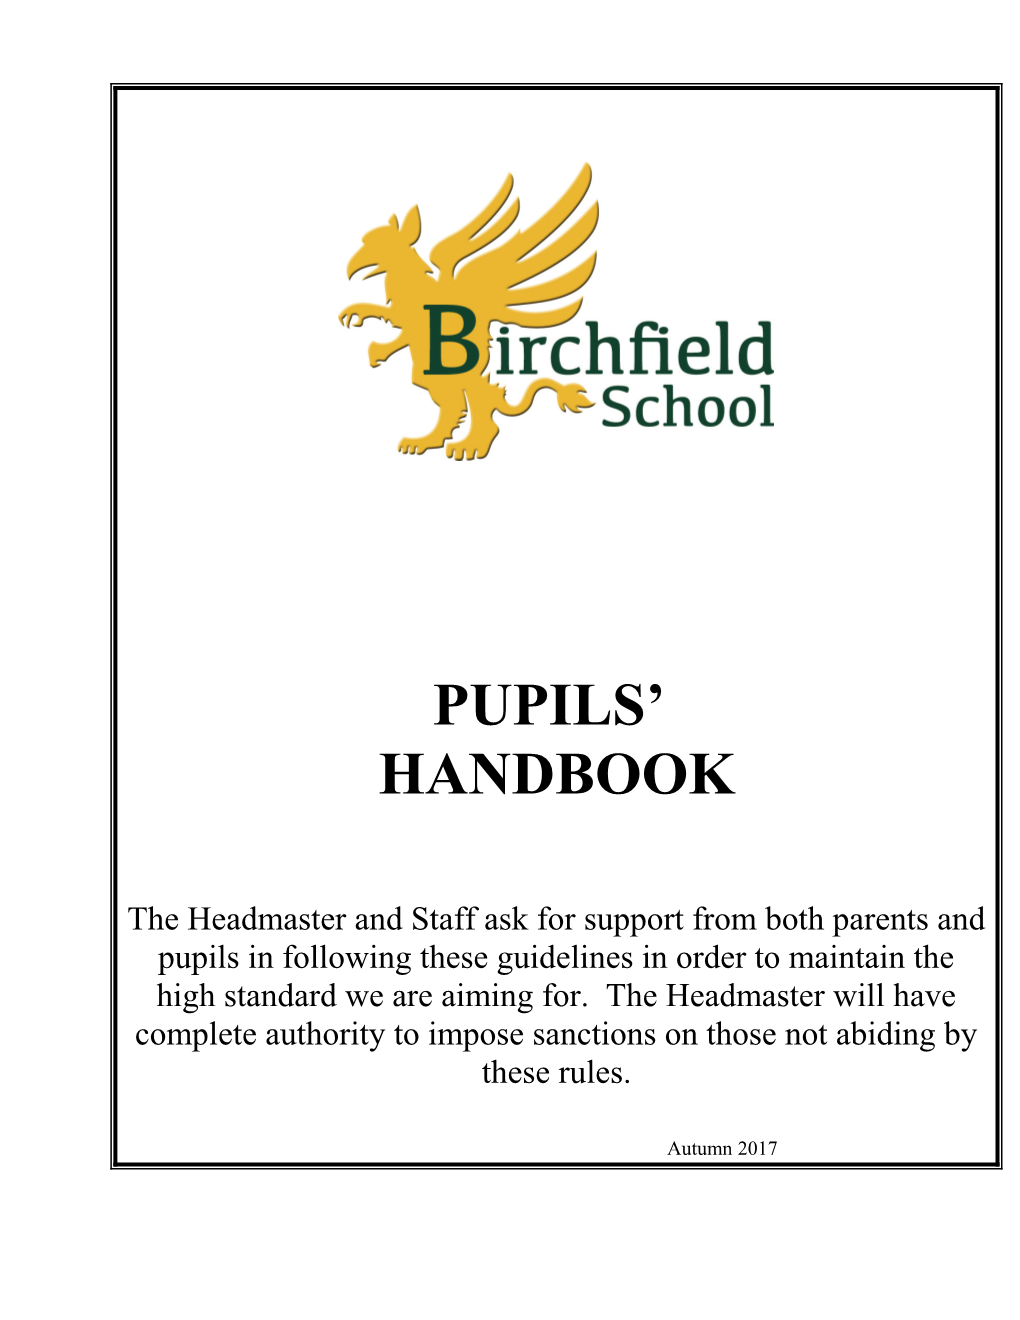 The School Ethos Is Laid out in the Ethos & Aims Policy Which Is Accessible on the Website